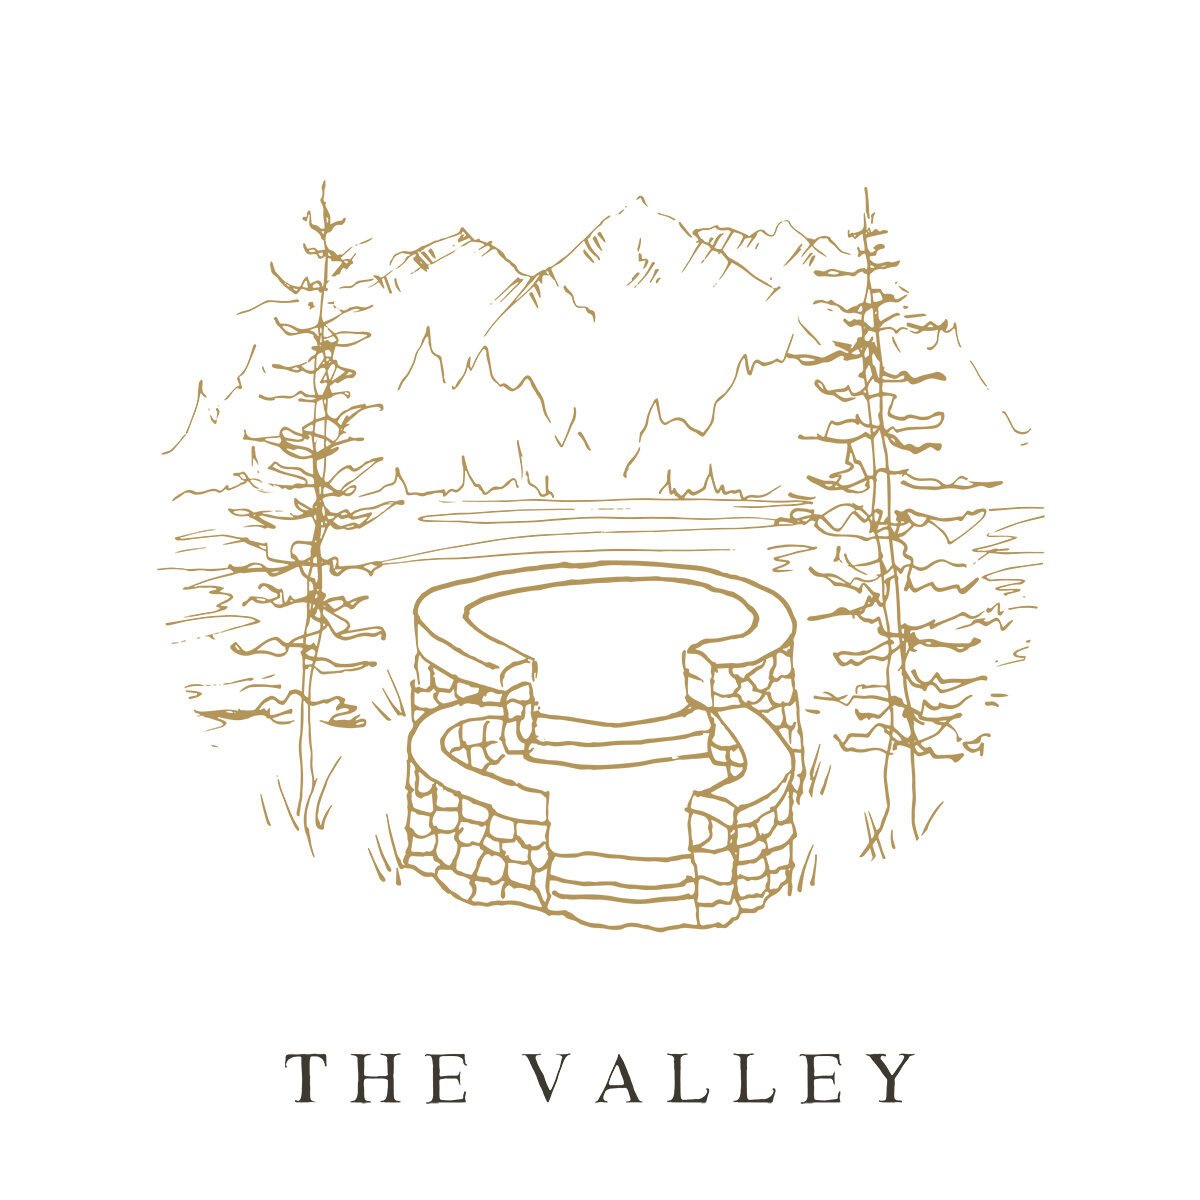 lindsay-mcghee-designs-the-whistler-elopement-company-illustration-the-valley